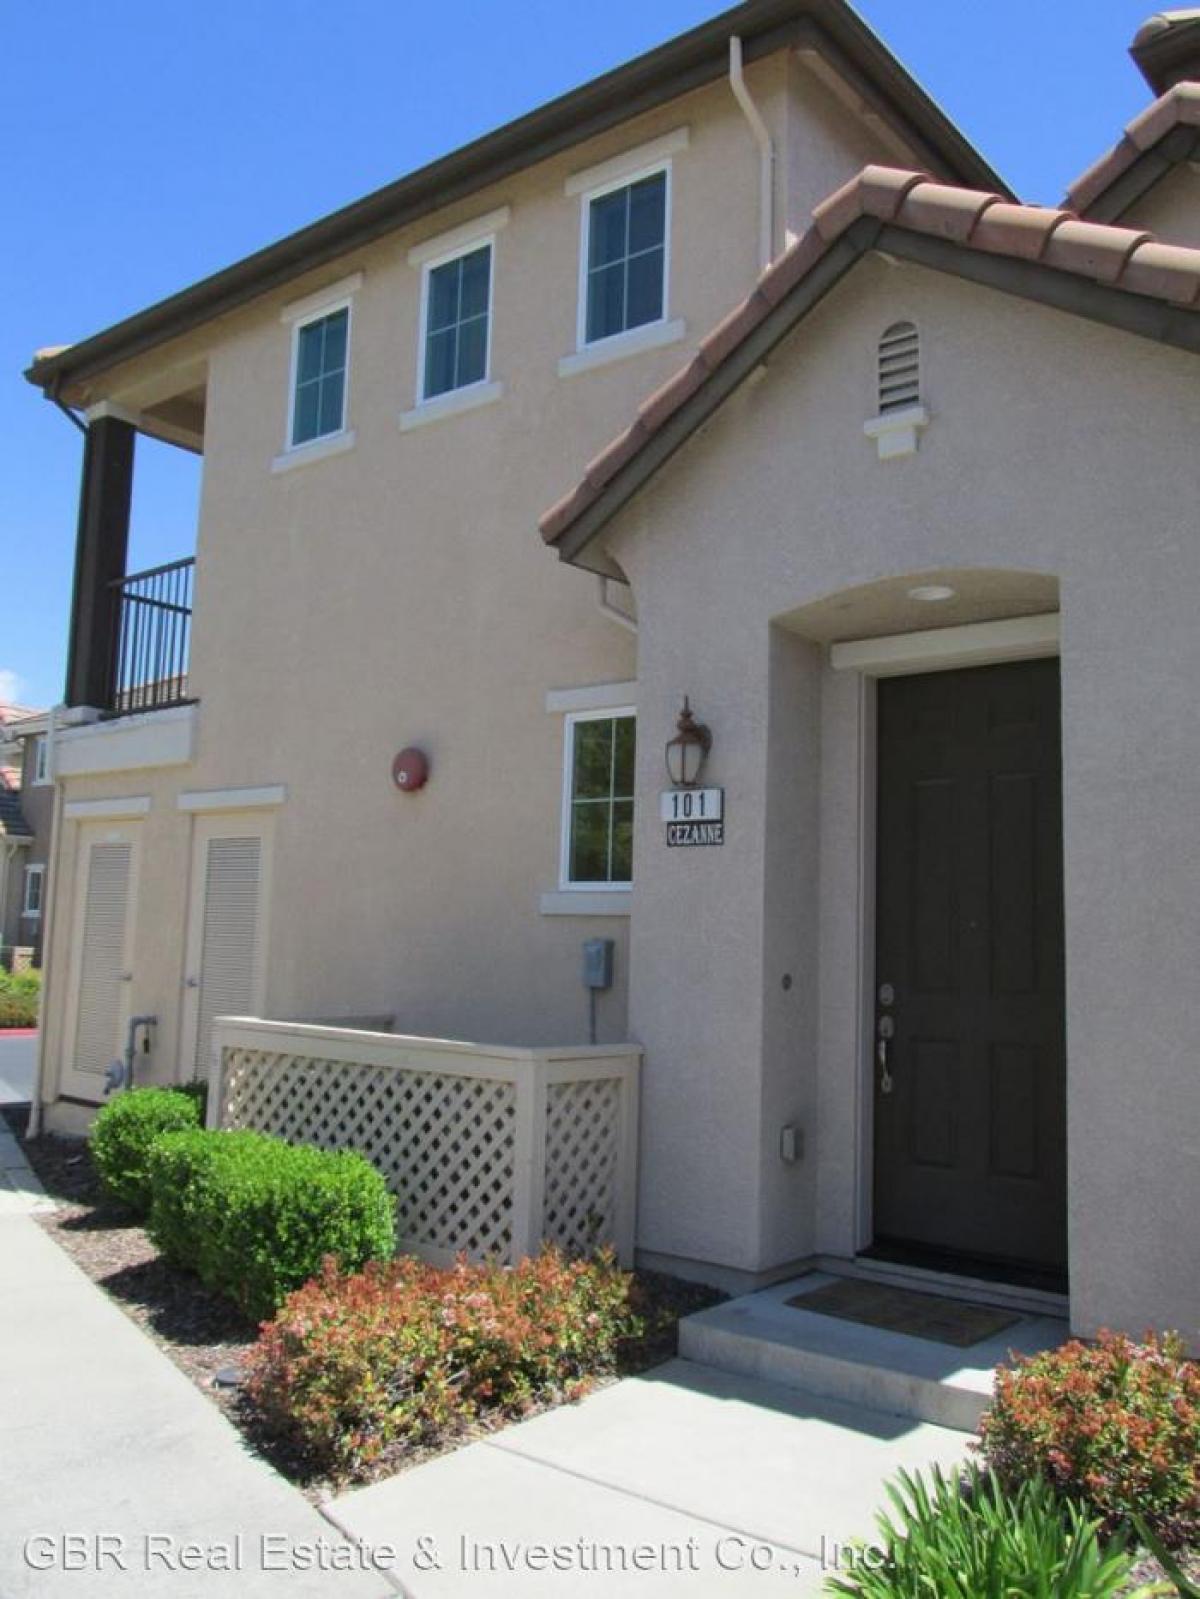 Picture of Home For Rent in Folsom, California, United States